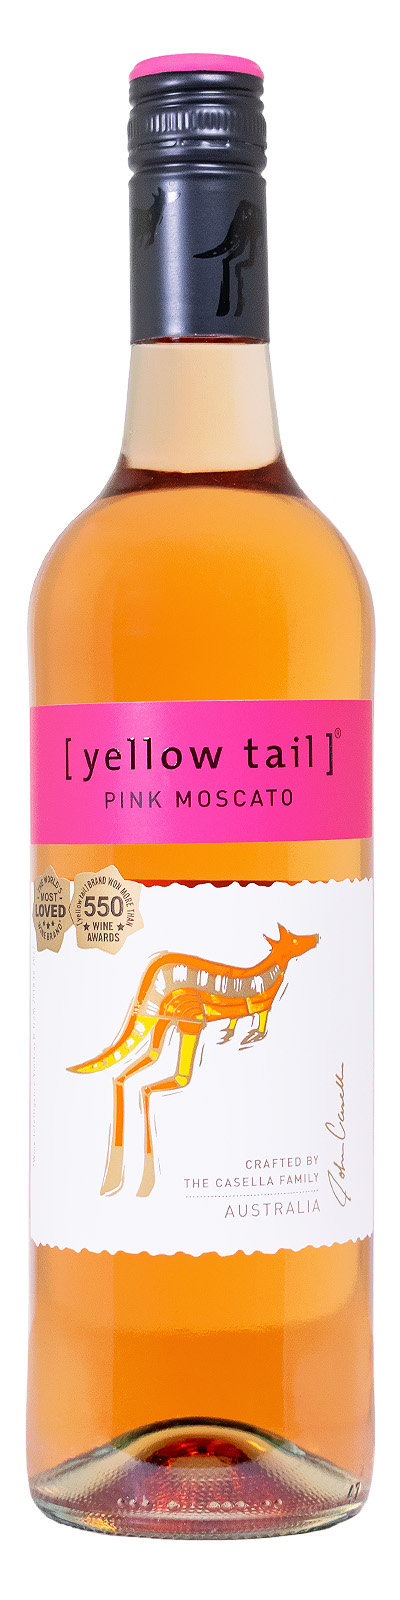 Yellow Tail Pink Moscato - 0,75L 7,5% vol